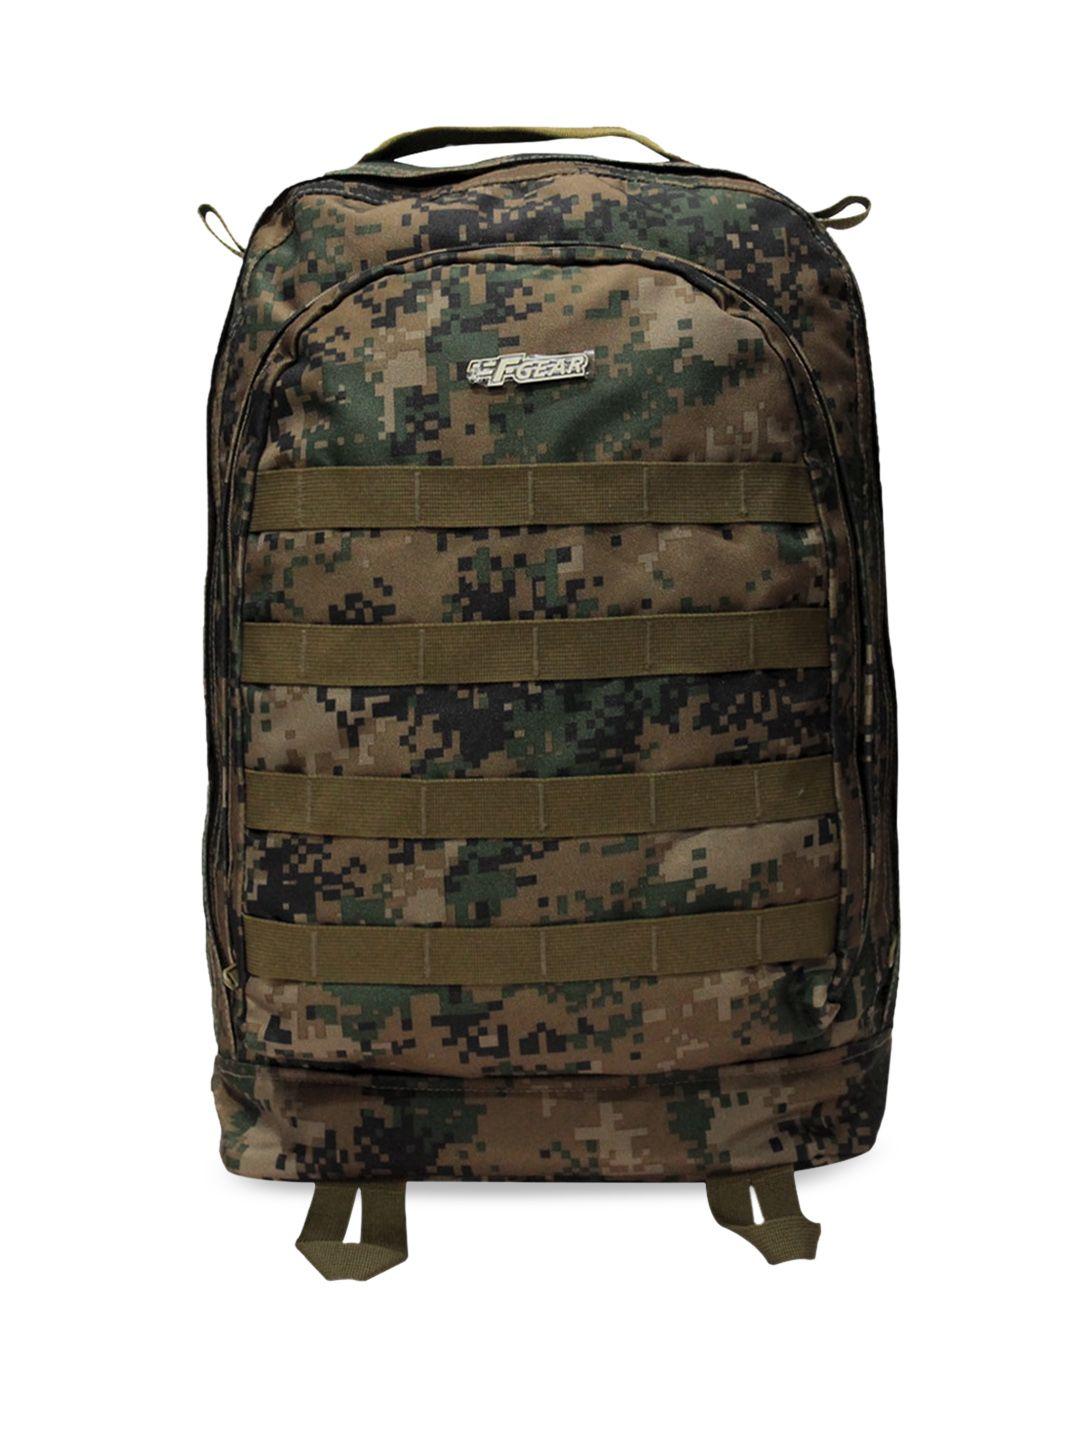 f gear unisex olive green & brown camouflage backpack